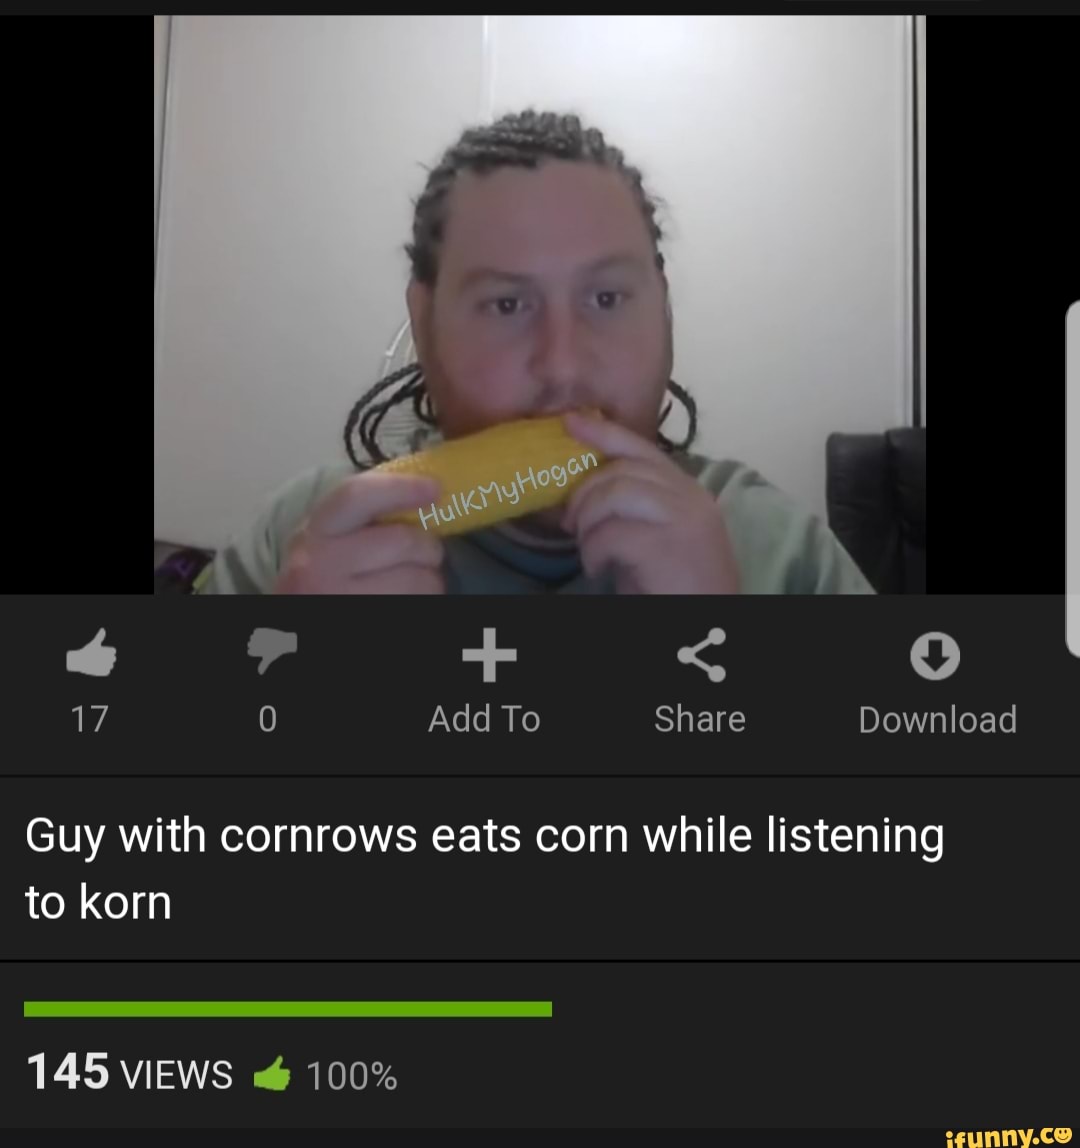 With cornrows eats corn while